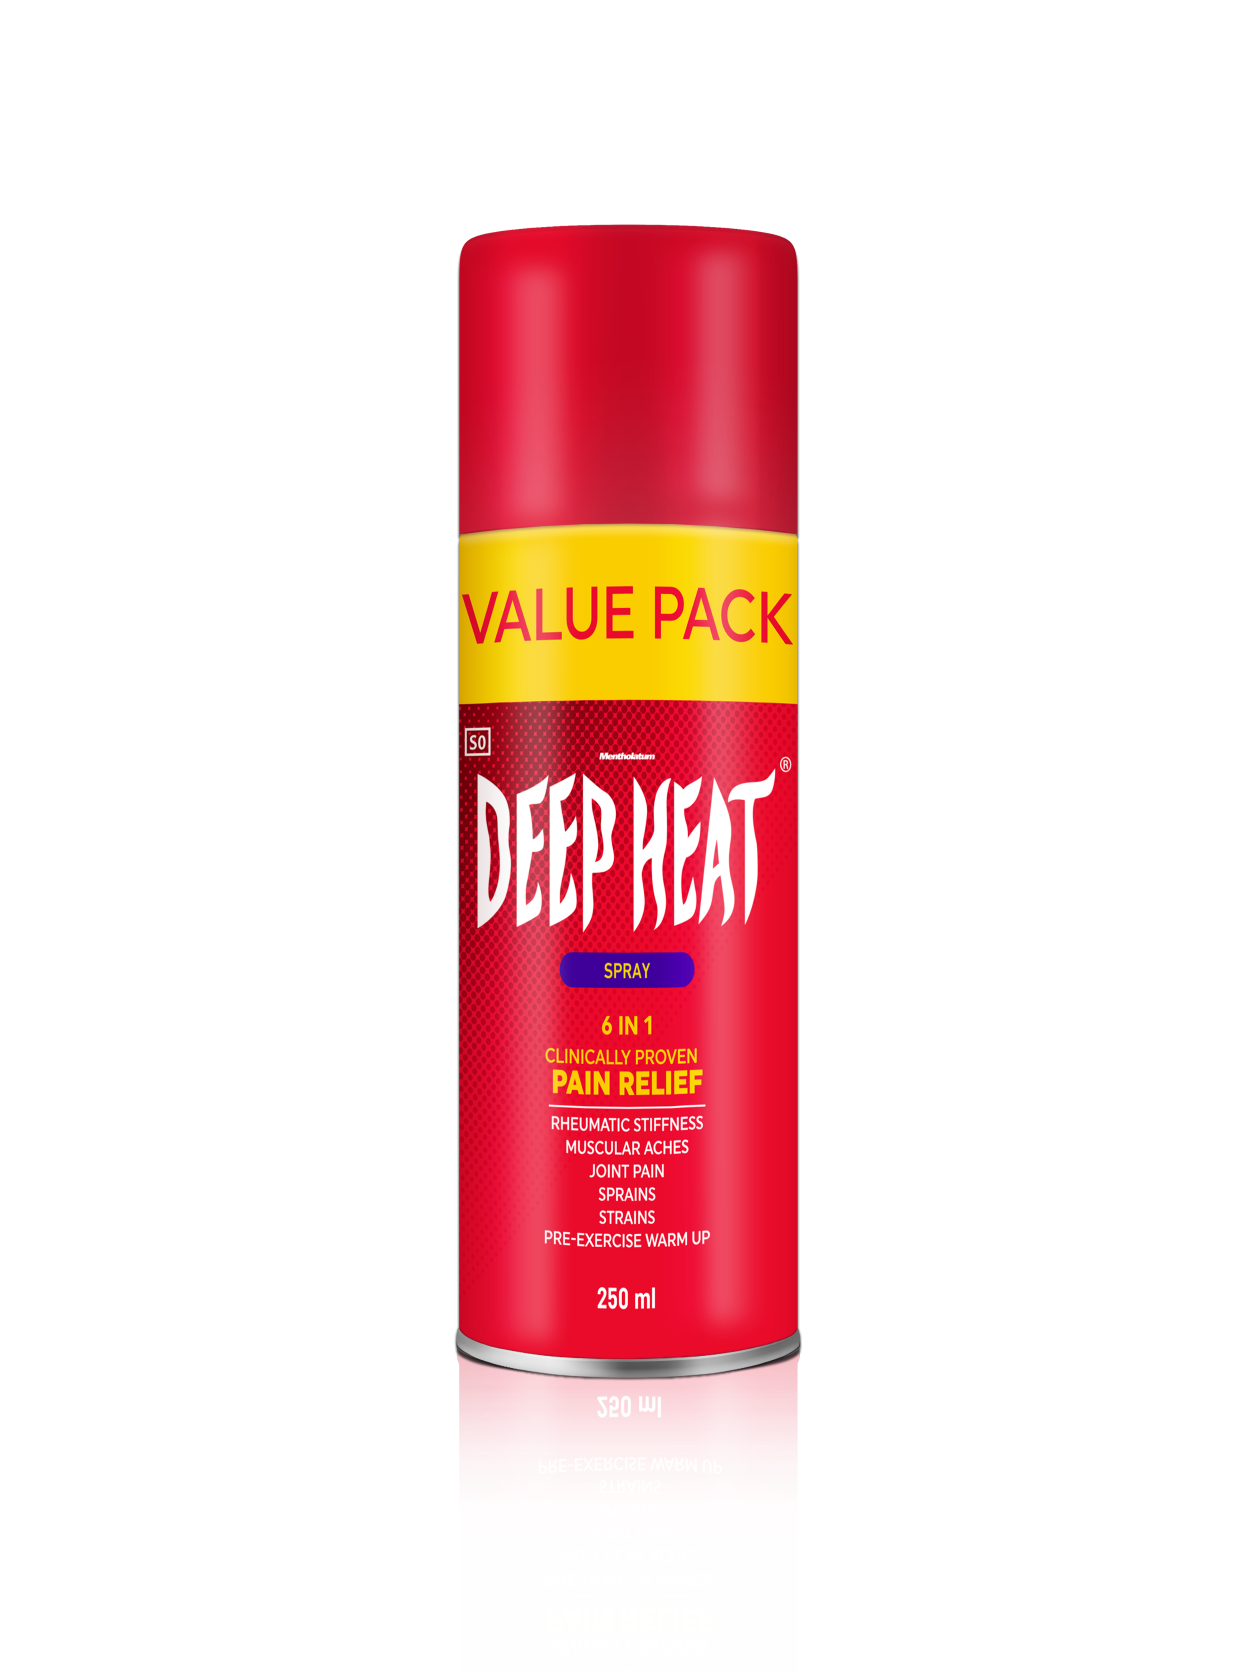 DEEP HEAT AND DEEP FREEZE EXPAND ITS RANGE TO DELIVER INCREASED CONSUMER BENEFIT